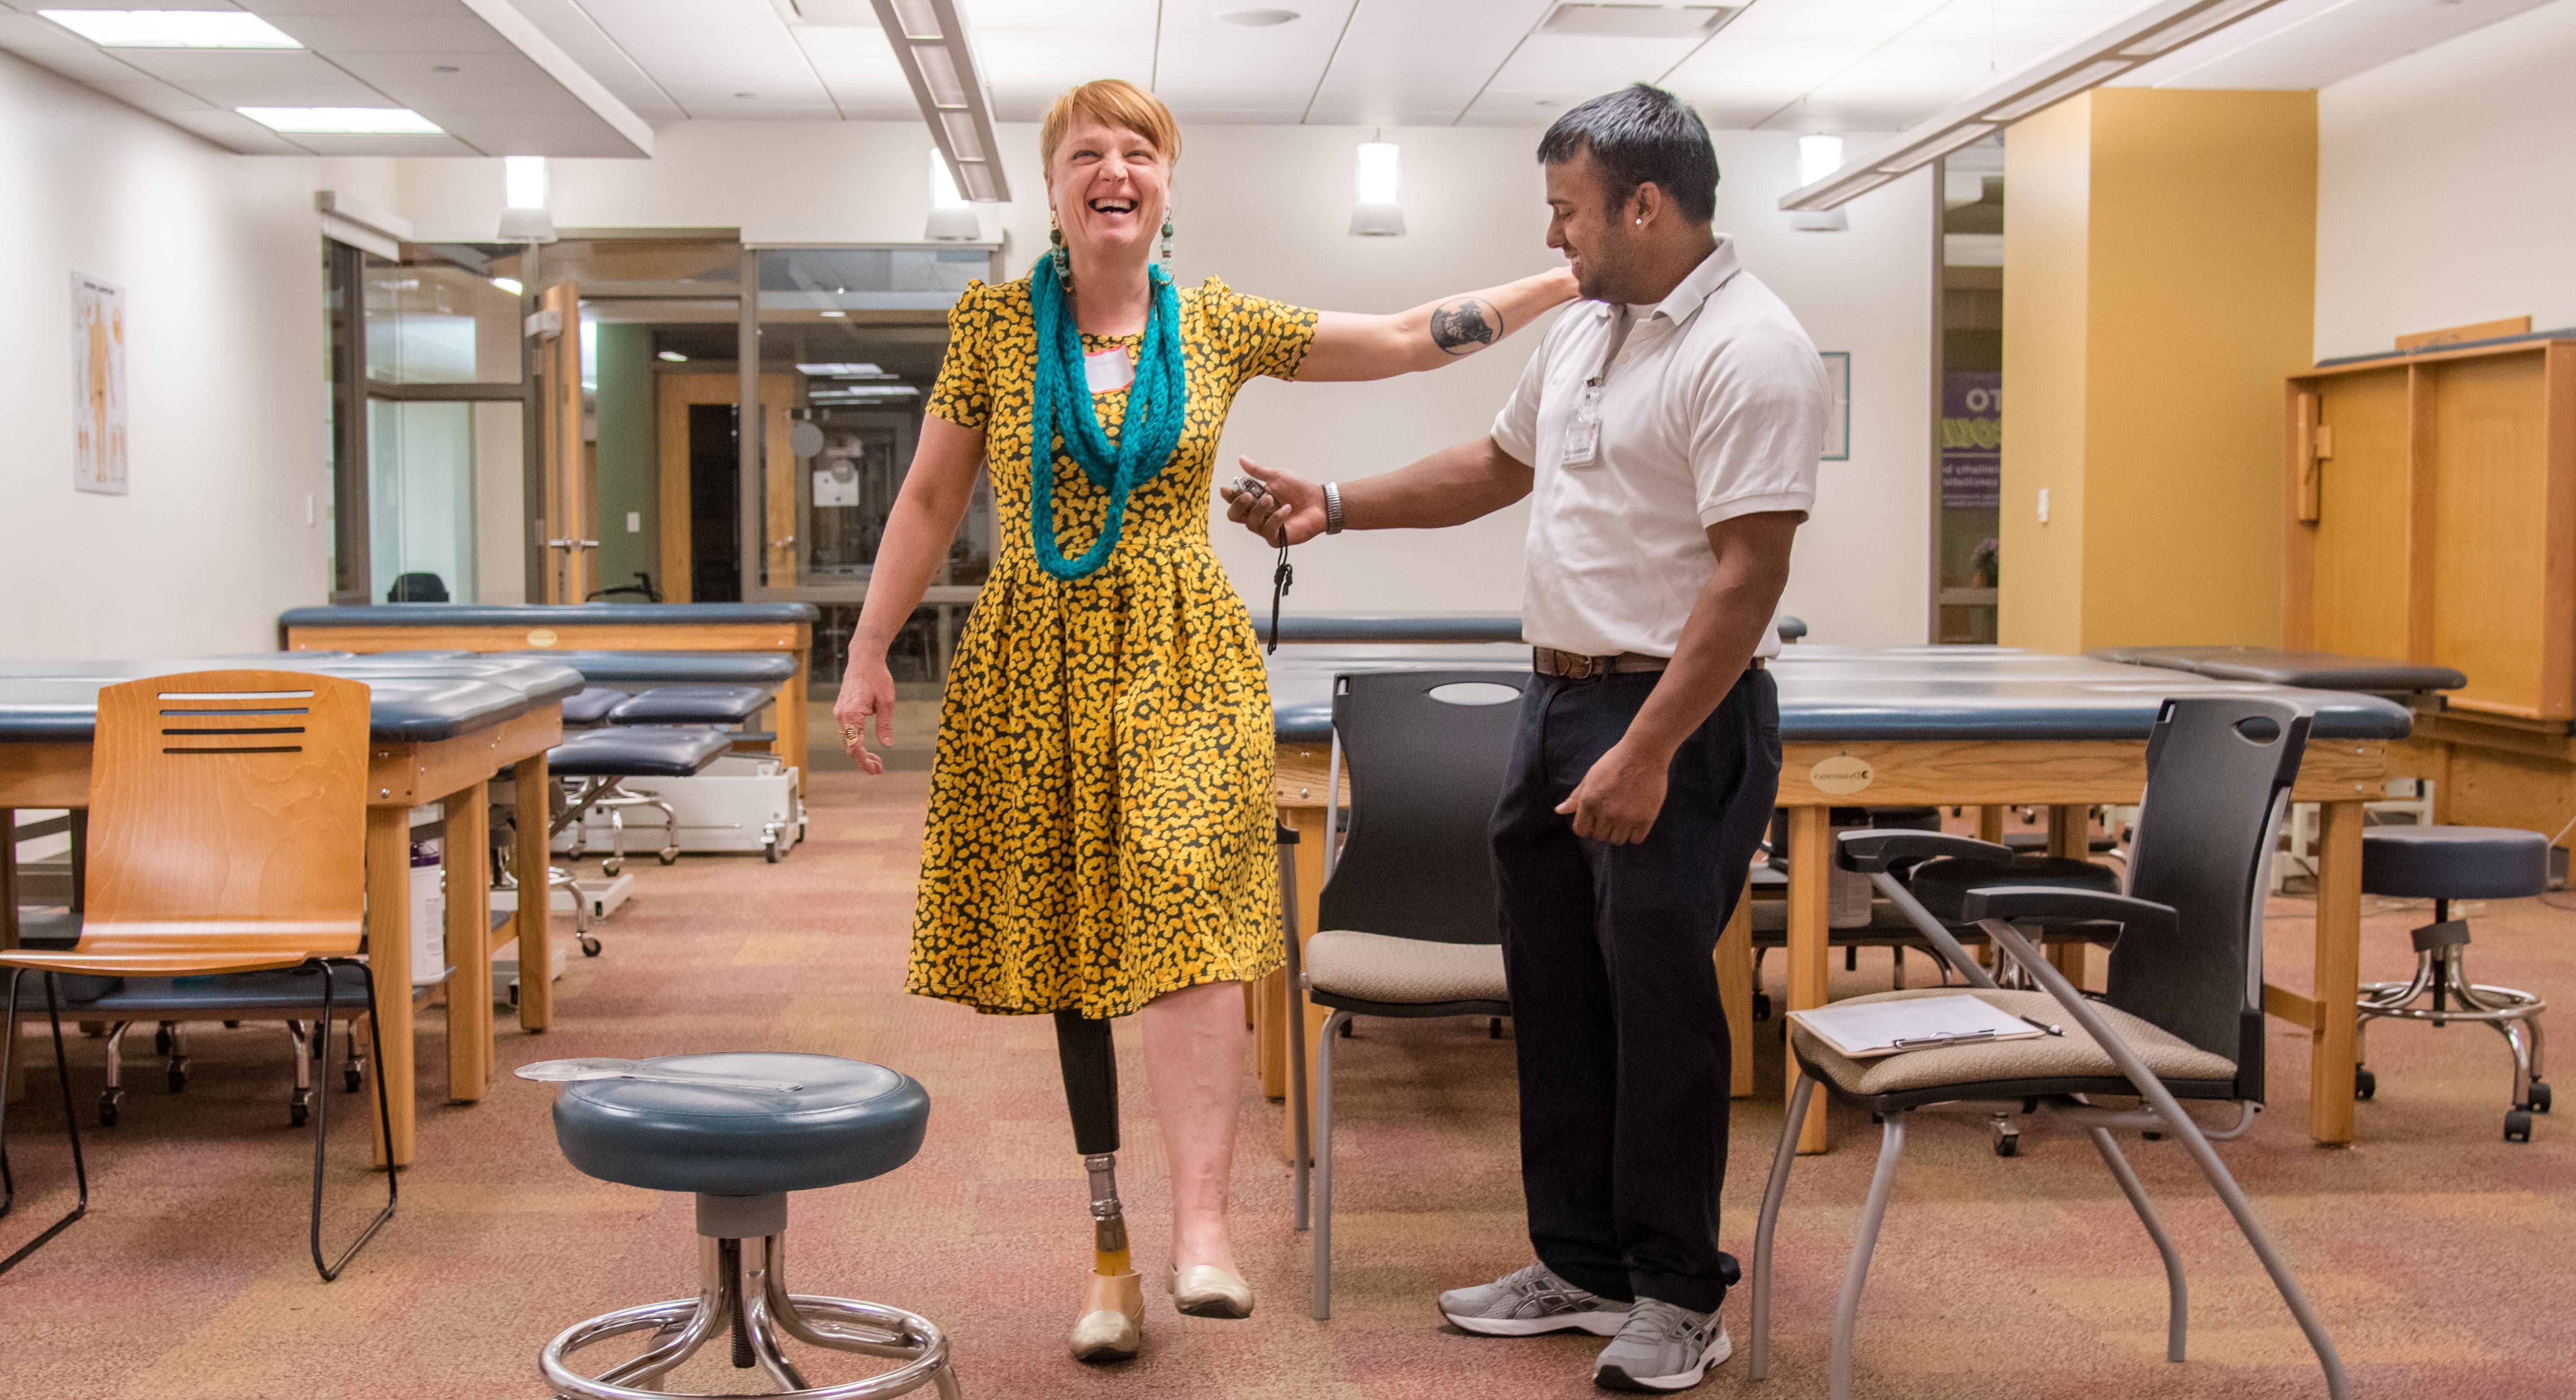 Photo of a Chatham University physical therapy student assisting a woman with a prosthetic leg walk across a physical therapy exercise room.